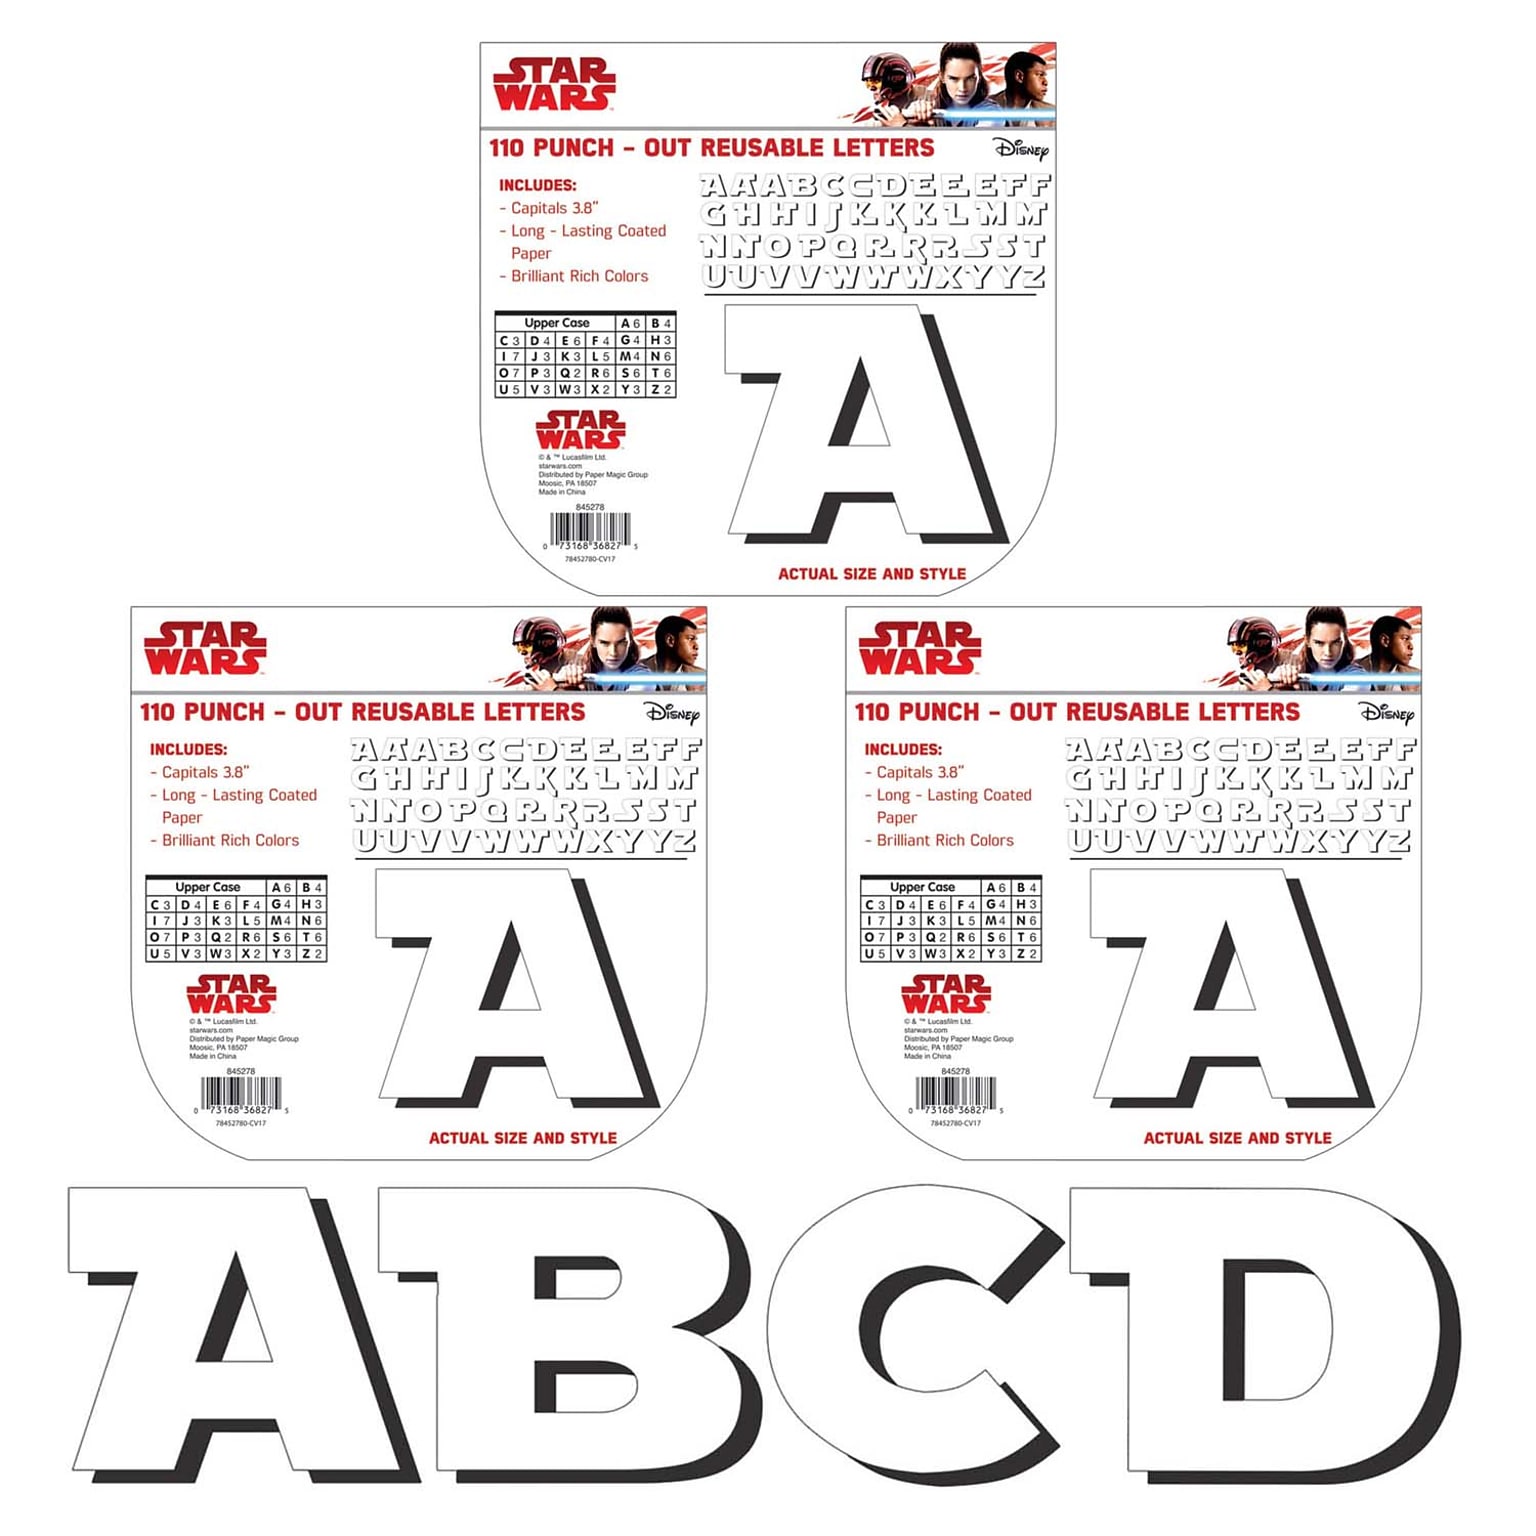 Eureka® Star Wars™ Super Troopers Reusable Punch Out Deco Letters, White, 110 Per Pack, 3 Packs (EU-845278-3)